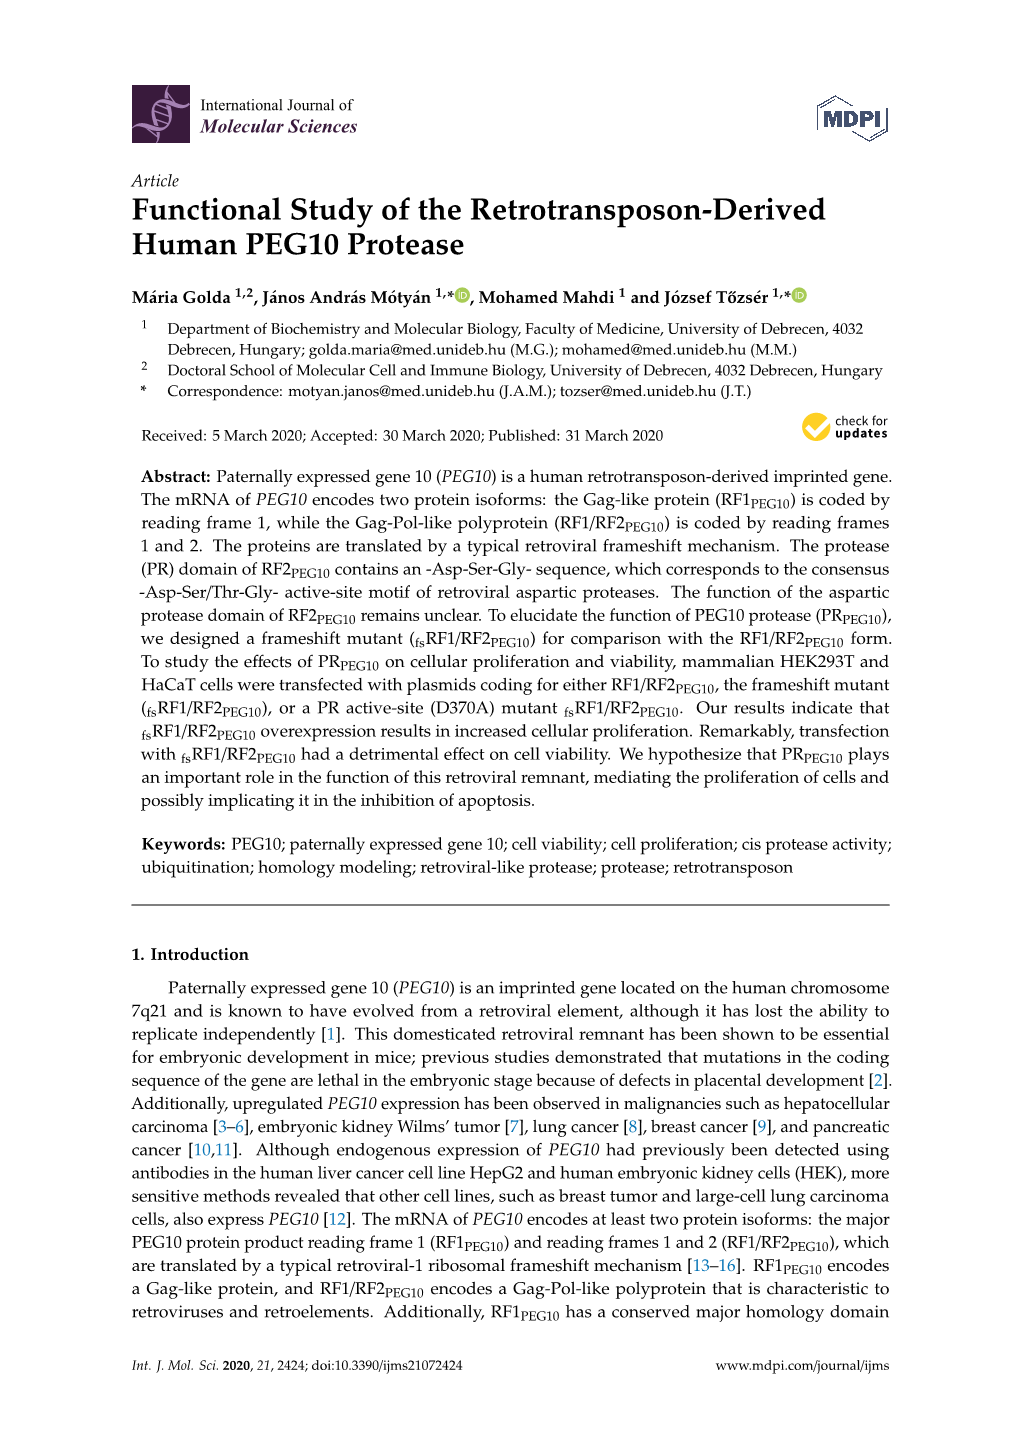 Functional Study of the Retrotransposon-Derived Human PEG10 Protease